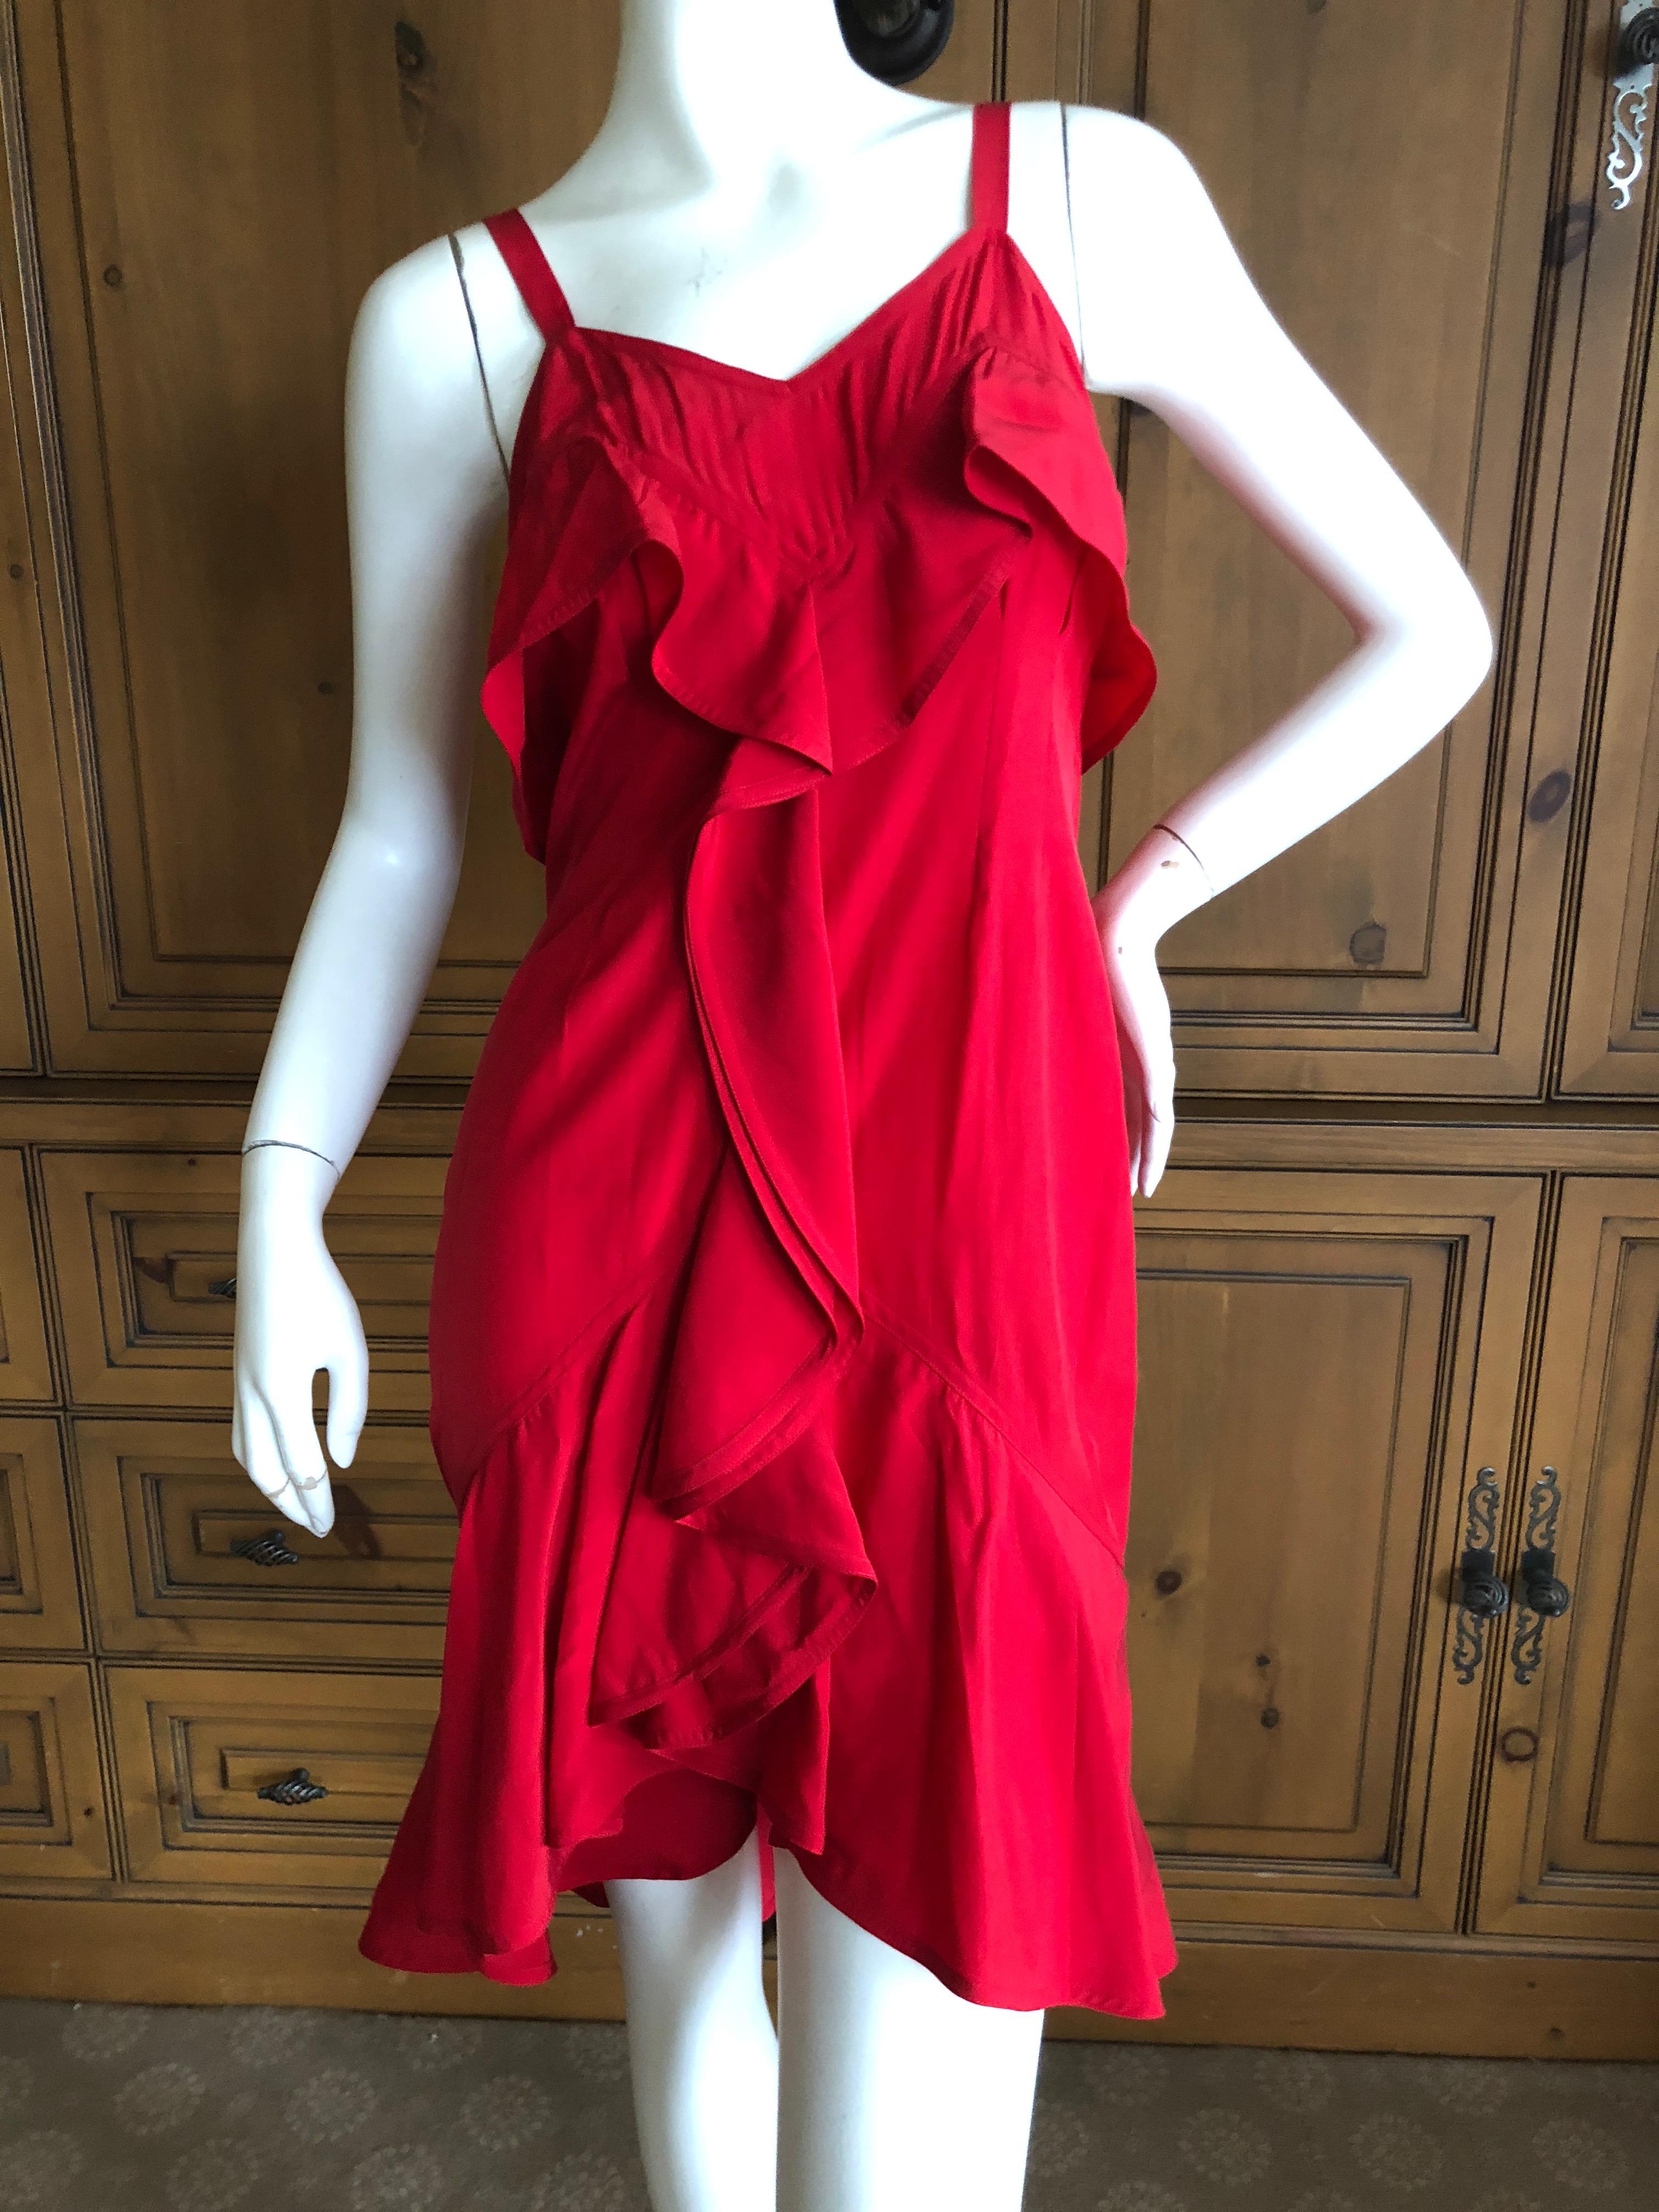 Yves Saint Laurent Tom Ford Fall 2003 Look 1 Red Ruffle Silk Dress In Excellent Condition For Sale In Cloverdale, CA